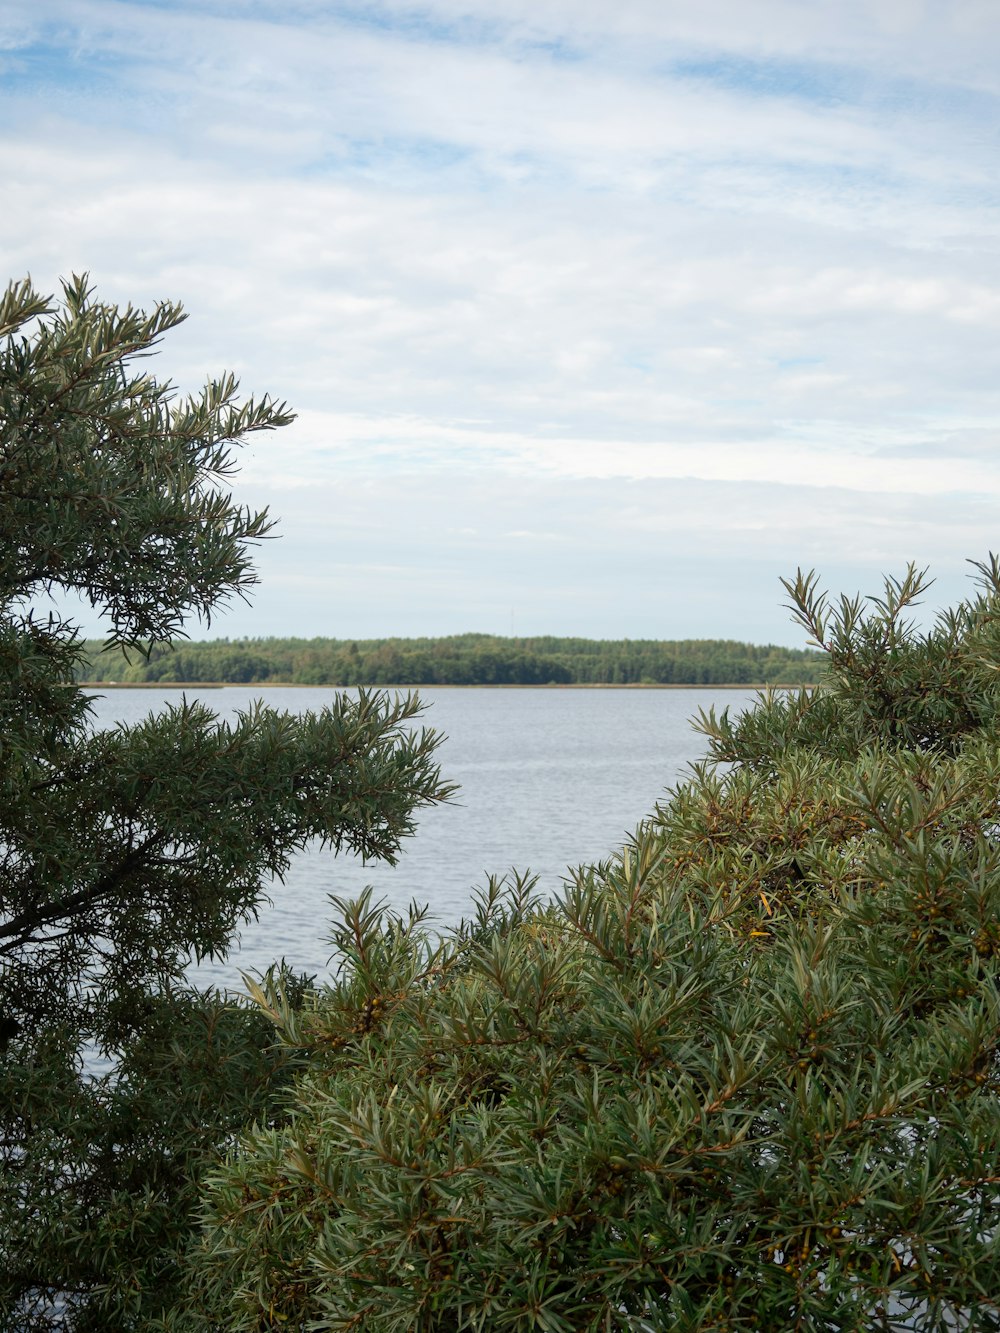 a view of a body of water from behind some trees